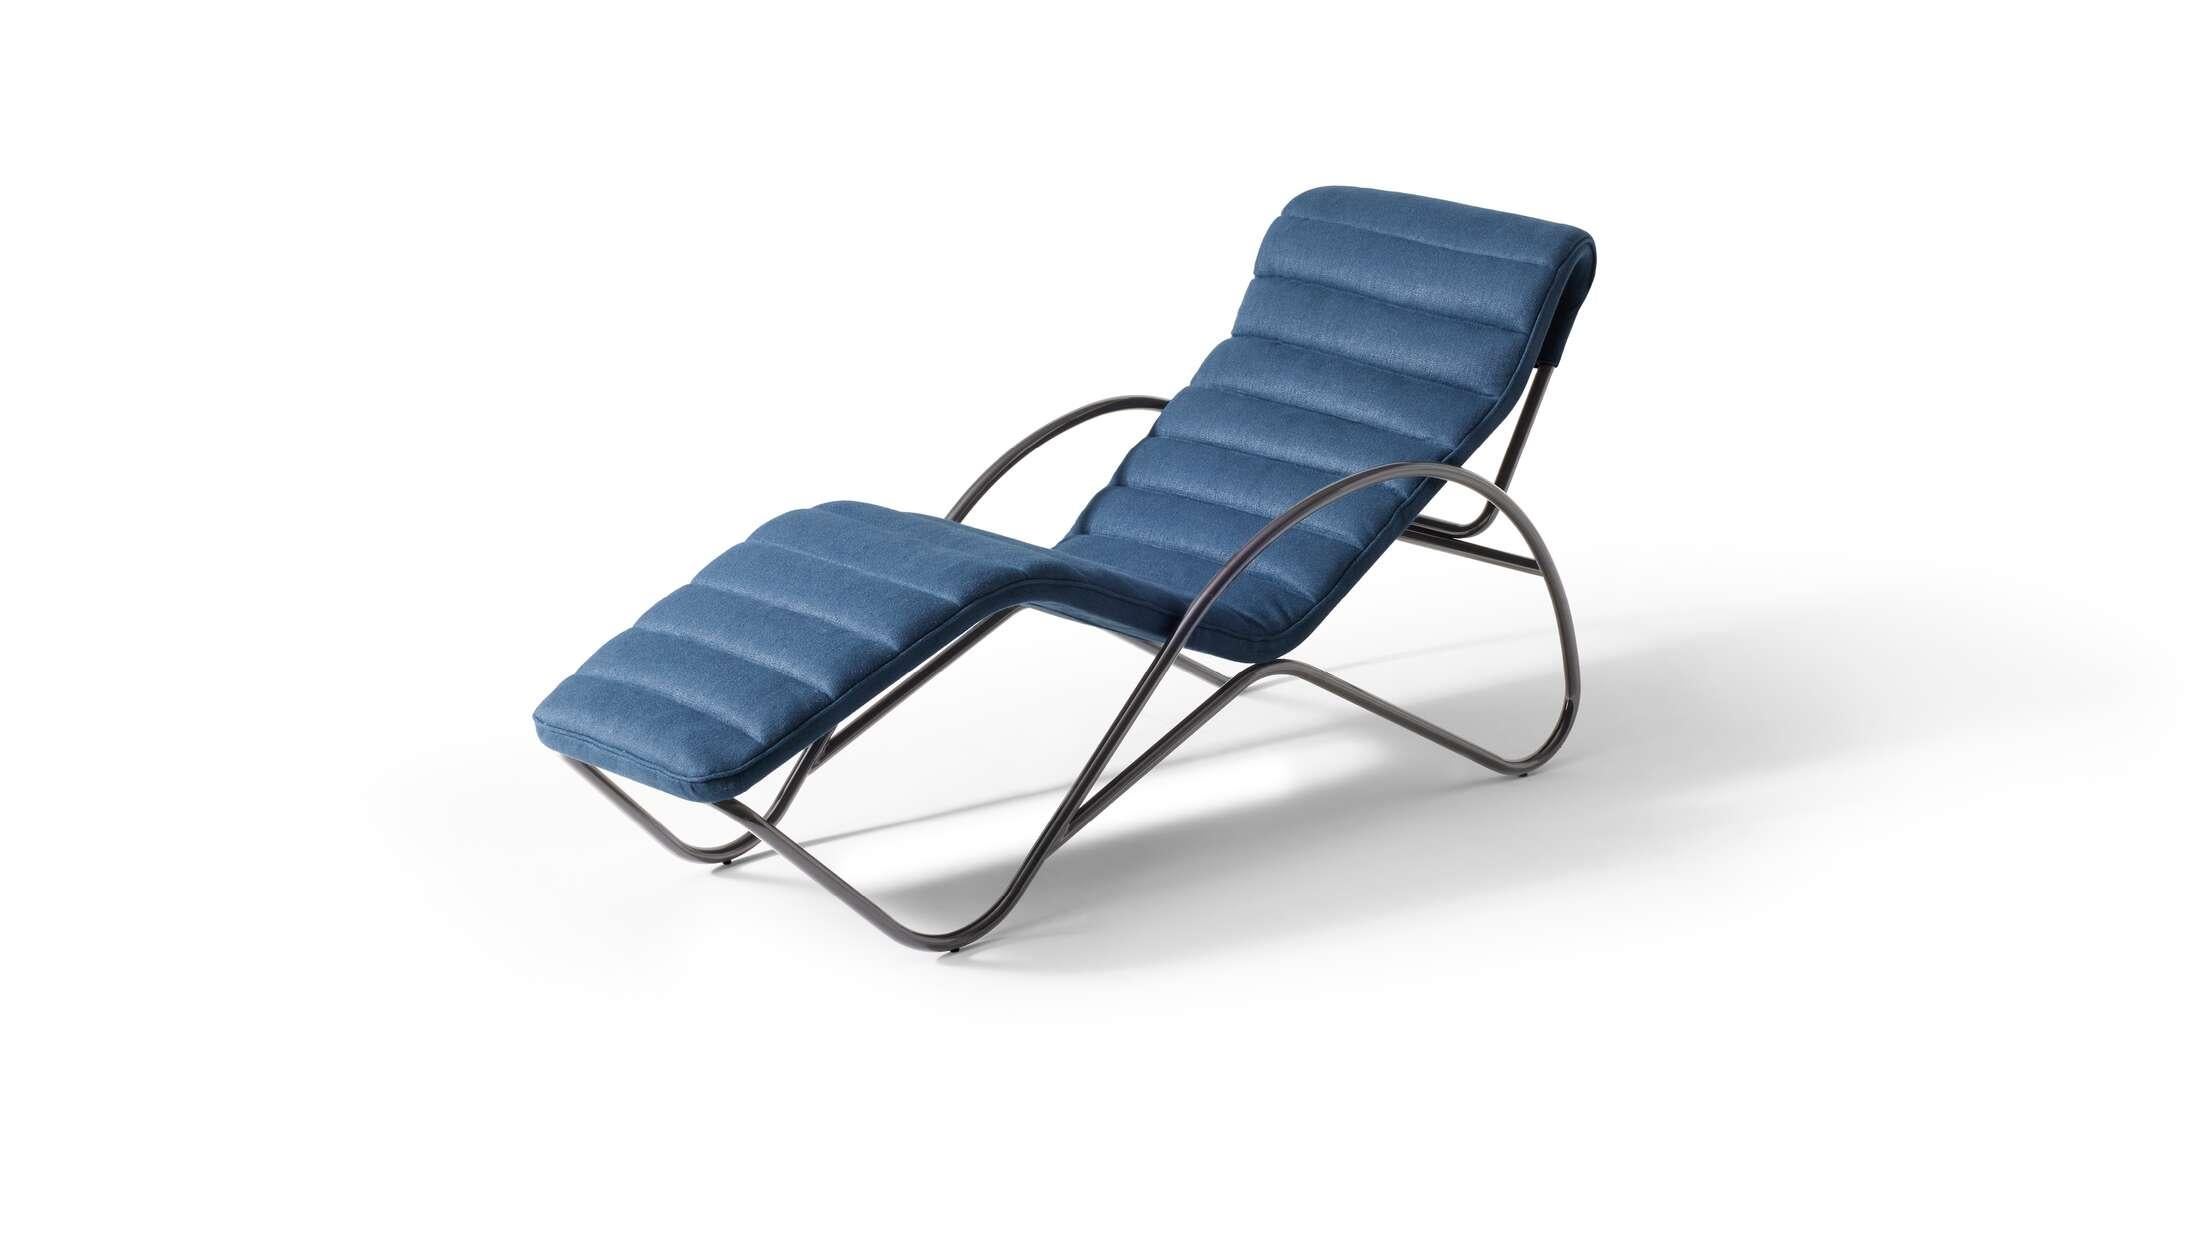 Charlotte Perriand Indochine Blue Chaise Lounge 
Manufactured by Cassina

A SYMPHONY OF MODERN LINES

An iconic chaise longue equipped with armrests, to read, write and work in complete relaxation.

In a crescendo of lines, three curved segments